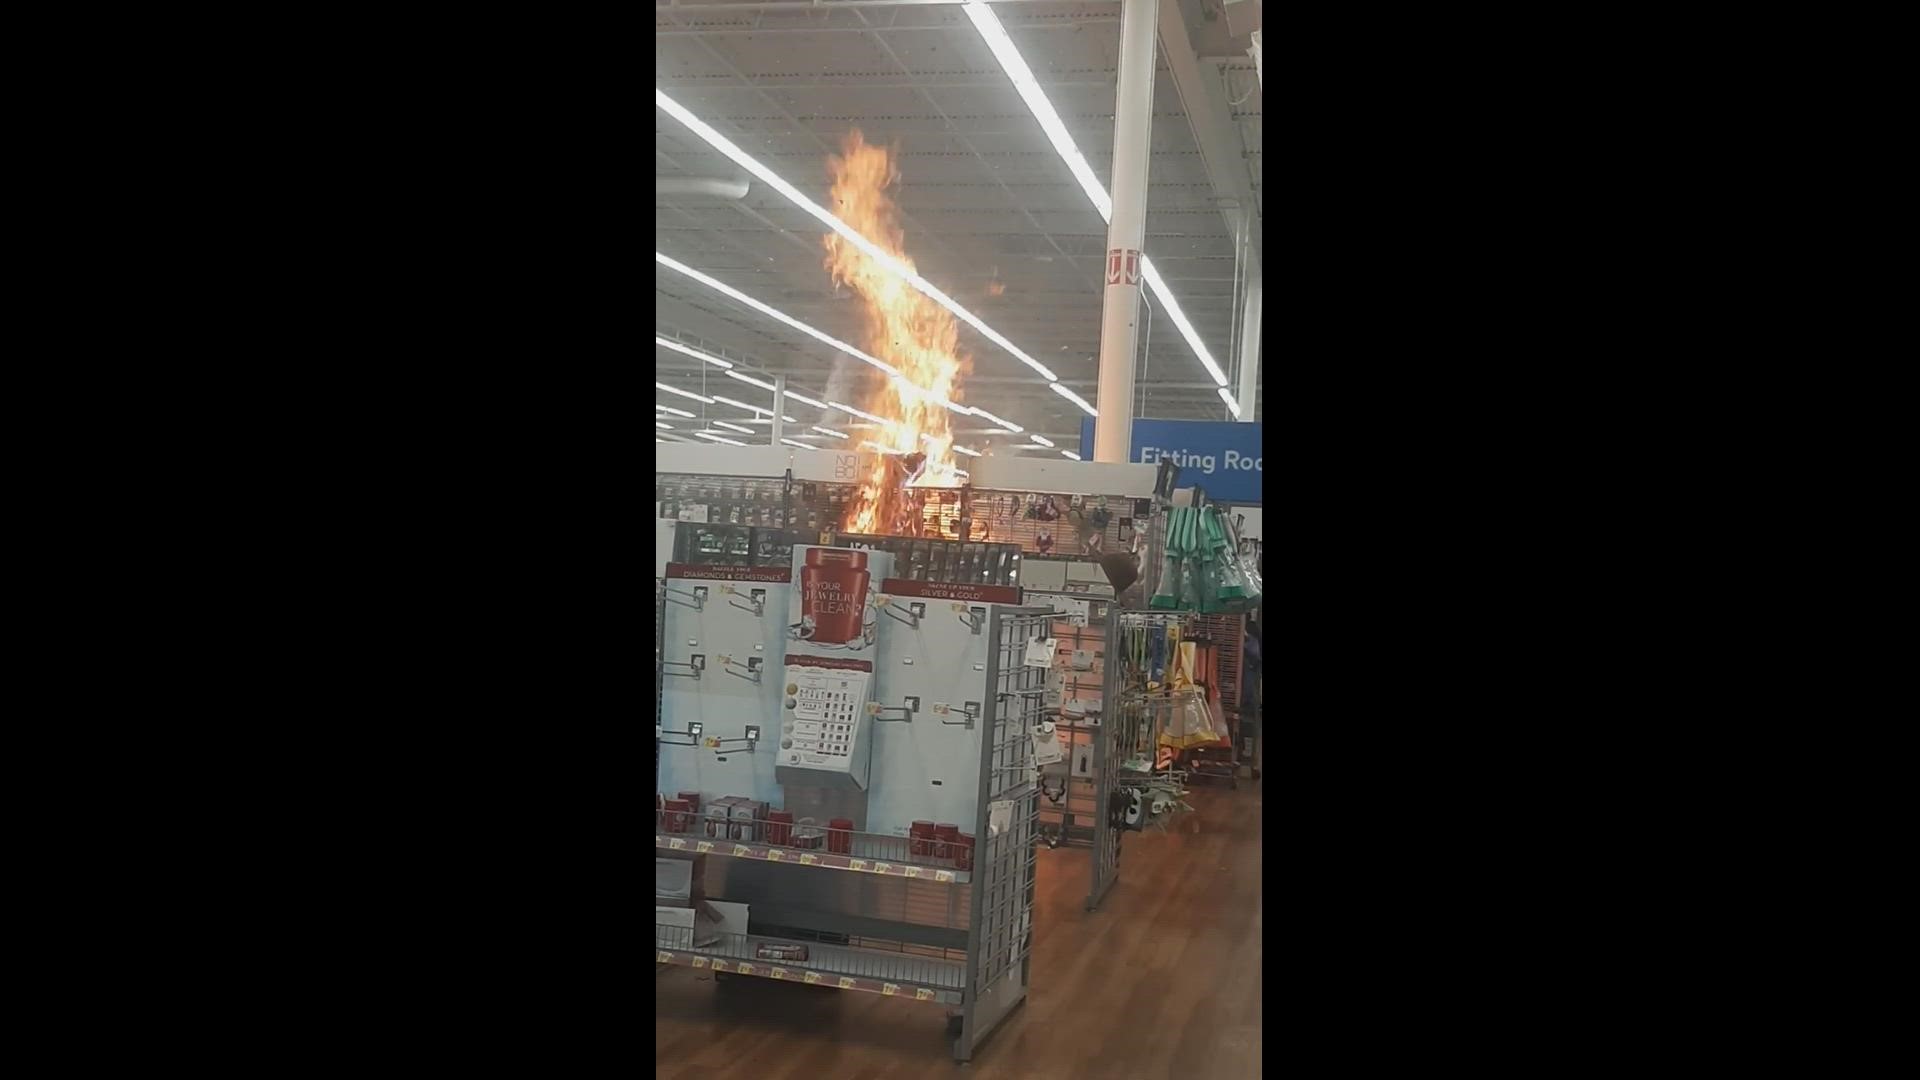 Video of the fire, posted on social media shows flames shooting out of what appears to be a clothing display.